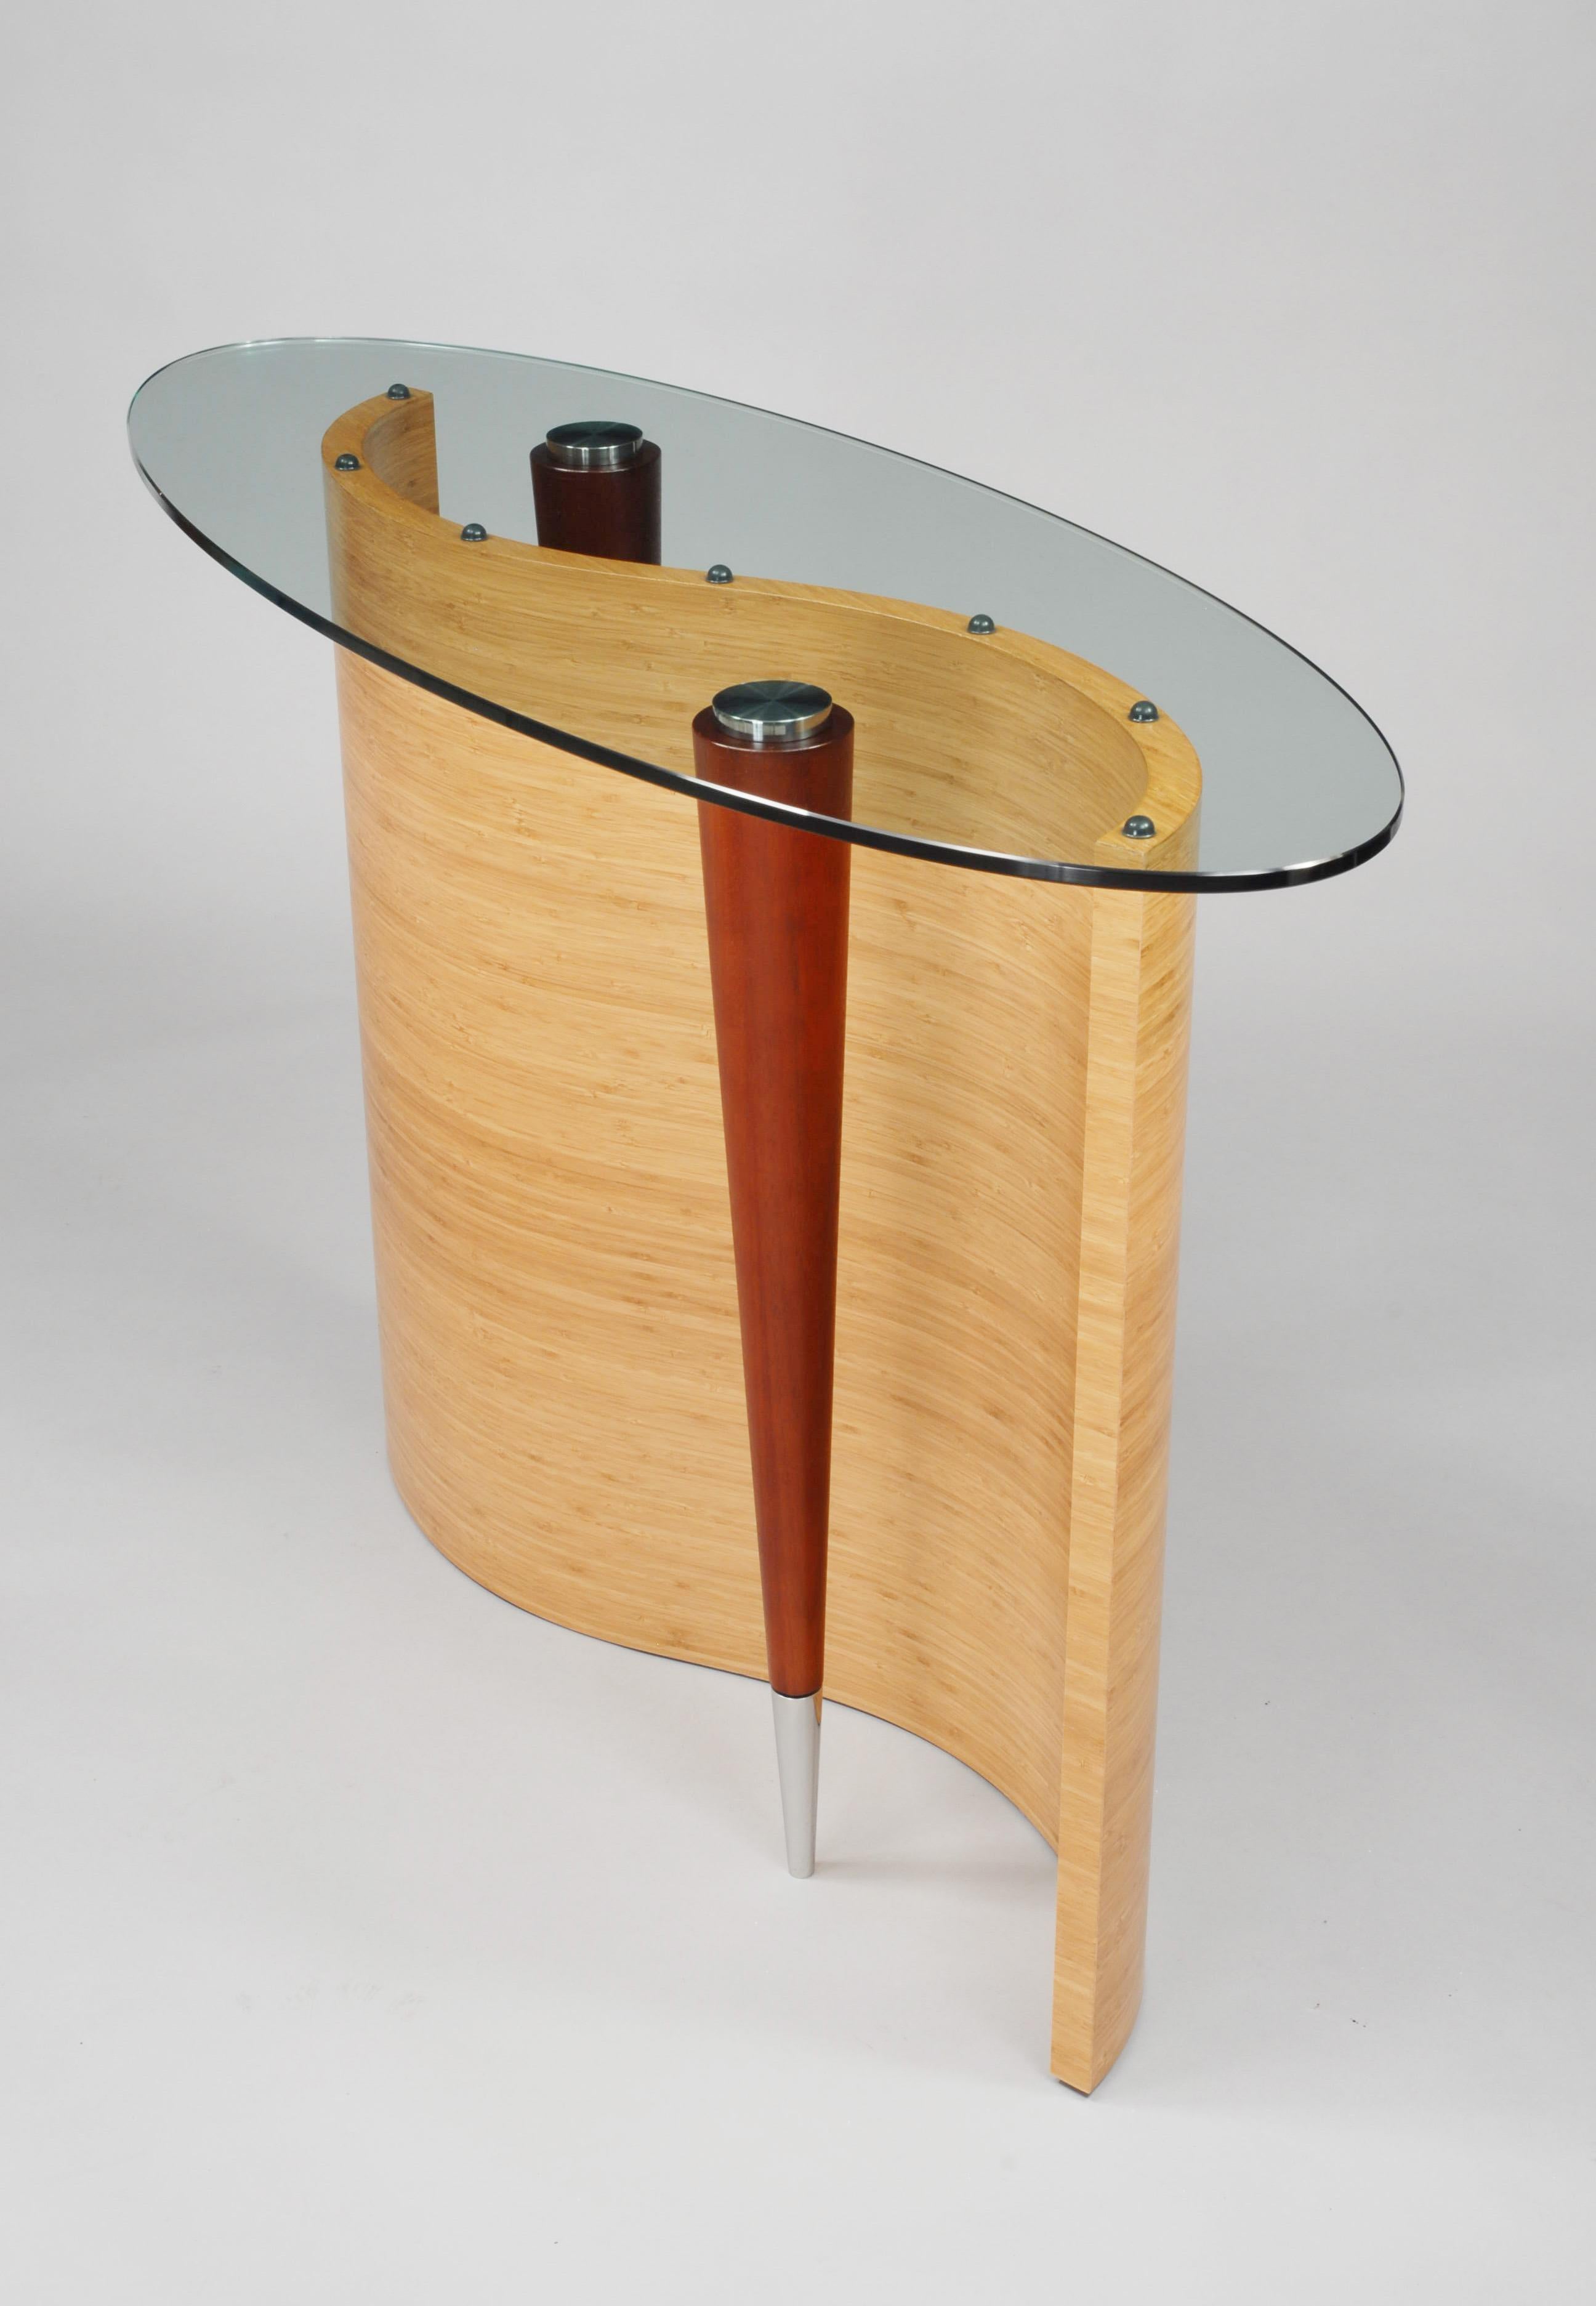 Shown at top with bamboo S-curve base, chestnut Lyptus legs and stainless steel foot detailing. The legs are attache via ultra violet crystal clear glue to the bottom of the glass, giving it the illusion of floating legs.

\All our work is